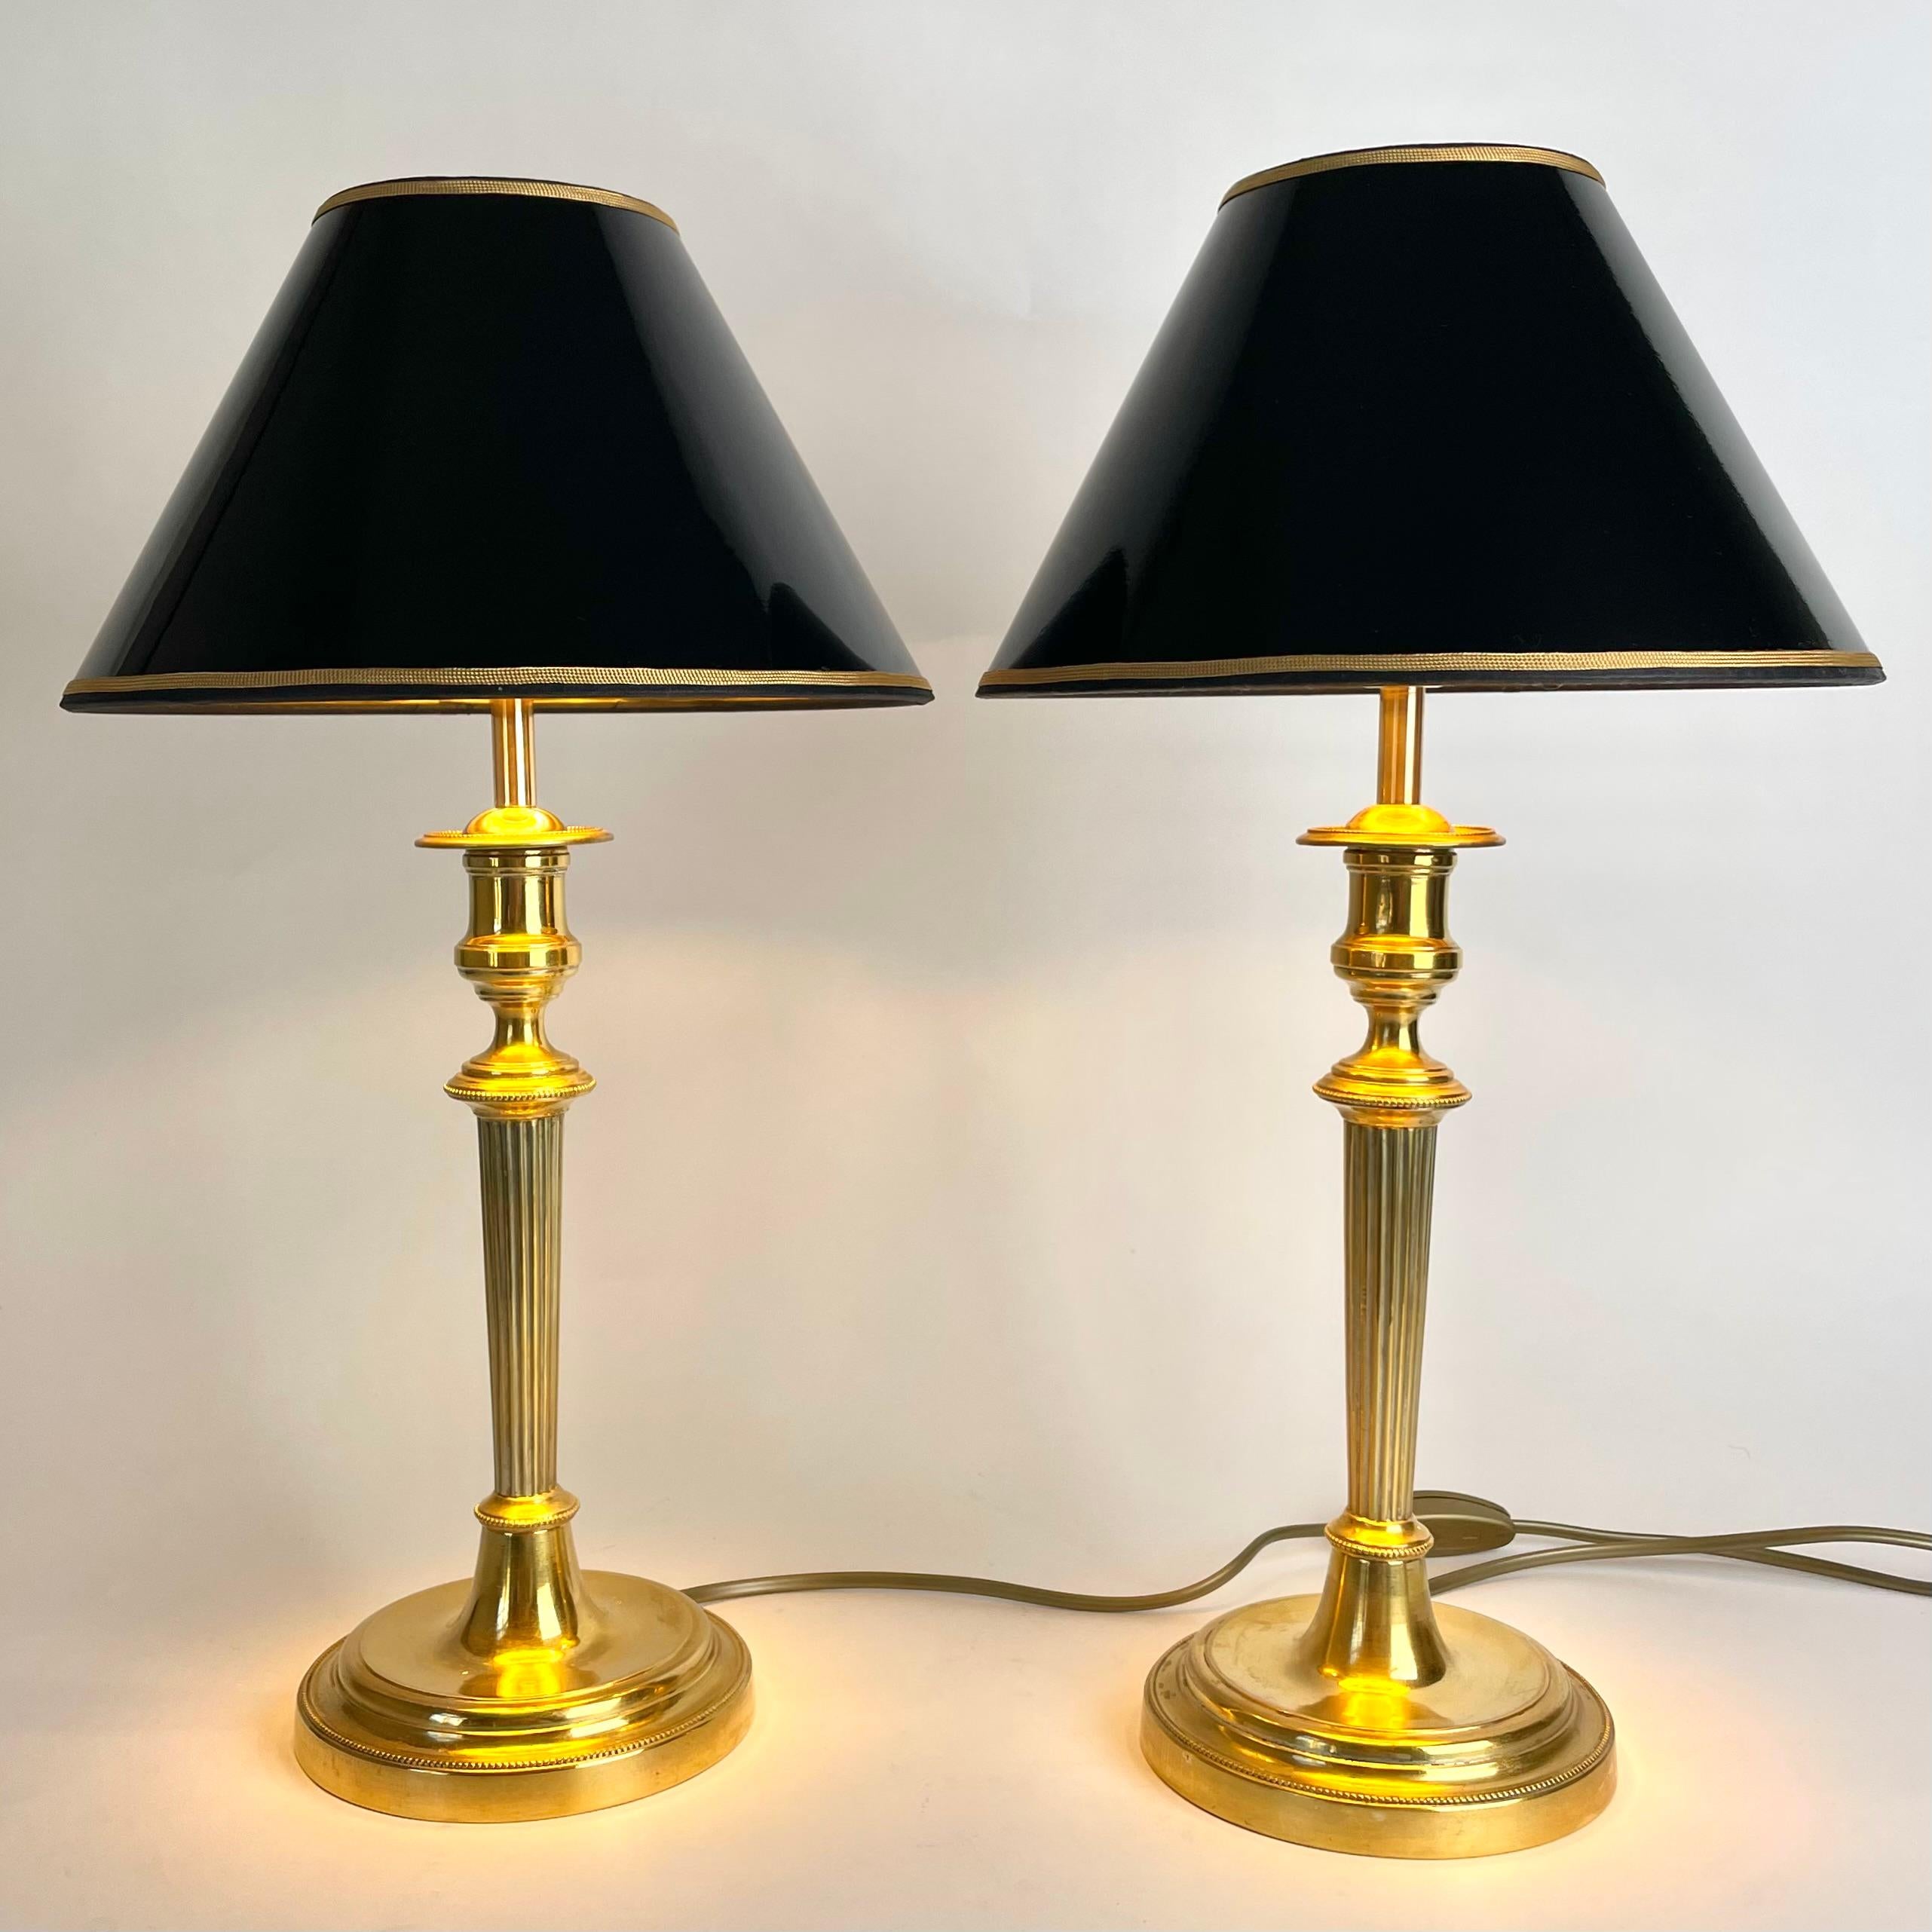 Beautiful pair of Empire Table Lamps in gilt Bronze. Originally a pair of Empire candlesticks from the 1820s, converted to table lamps in the early 20th Century.

Newly rewired electricity 

New lampshades in black lacquer with gilding on the